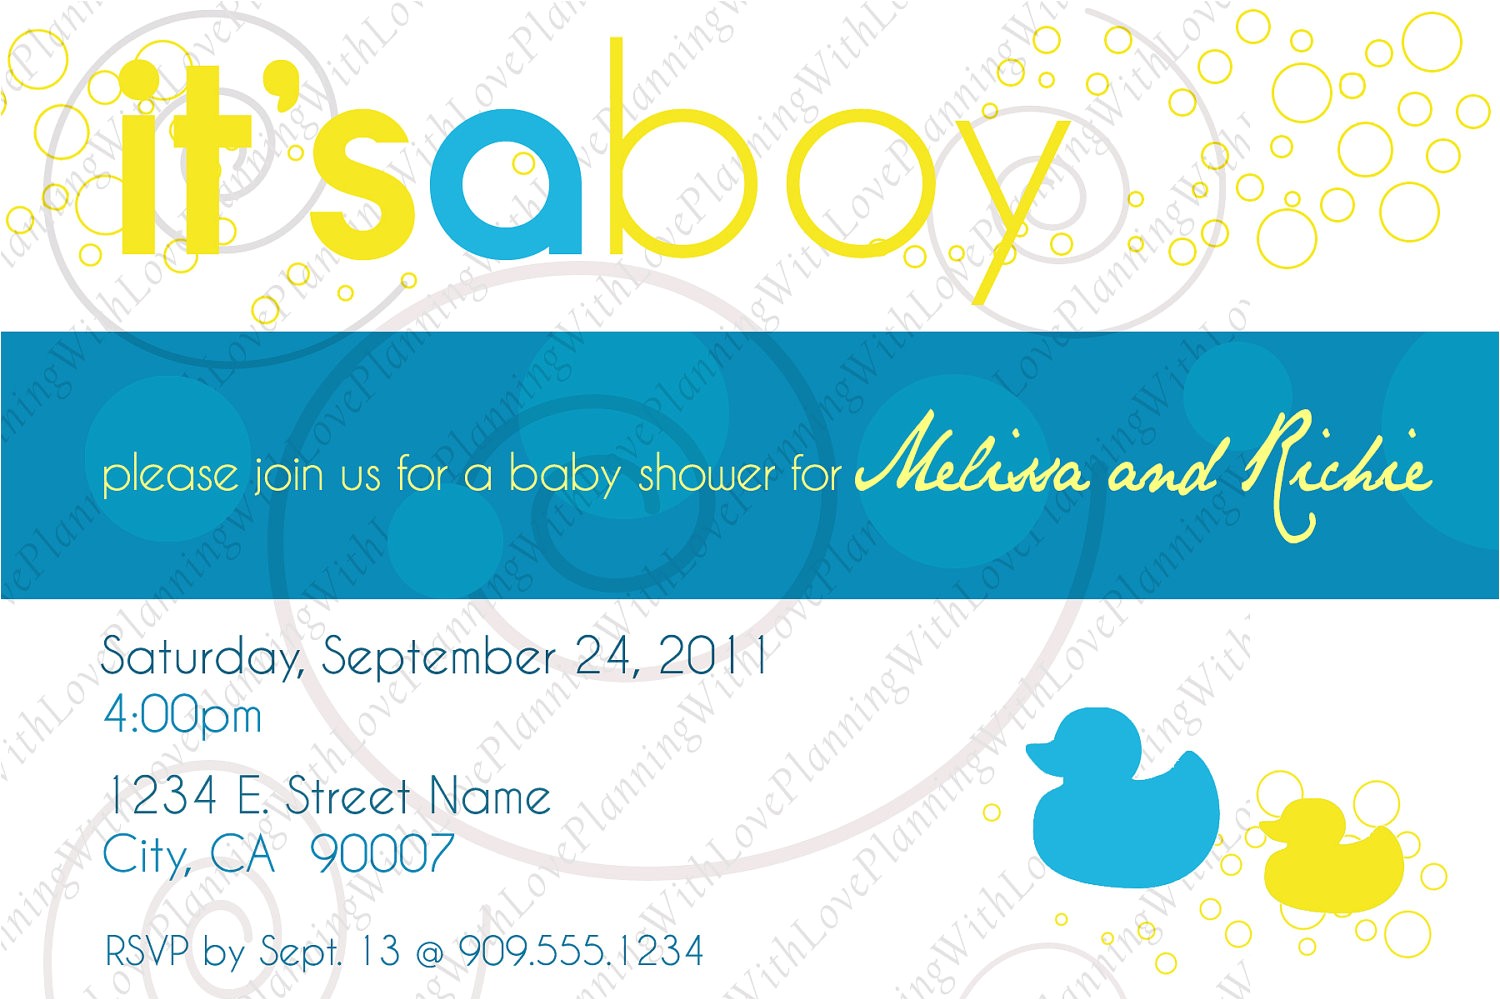 Cheap Rubber Duck Baby Shower Invitations Design Cheap Rubber Duck Baby Shower Invitations Rubber